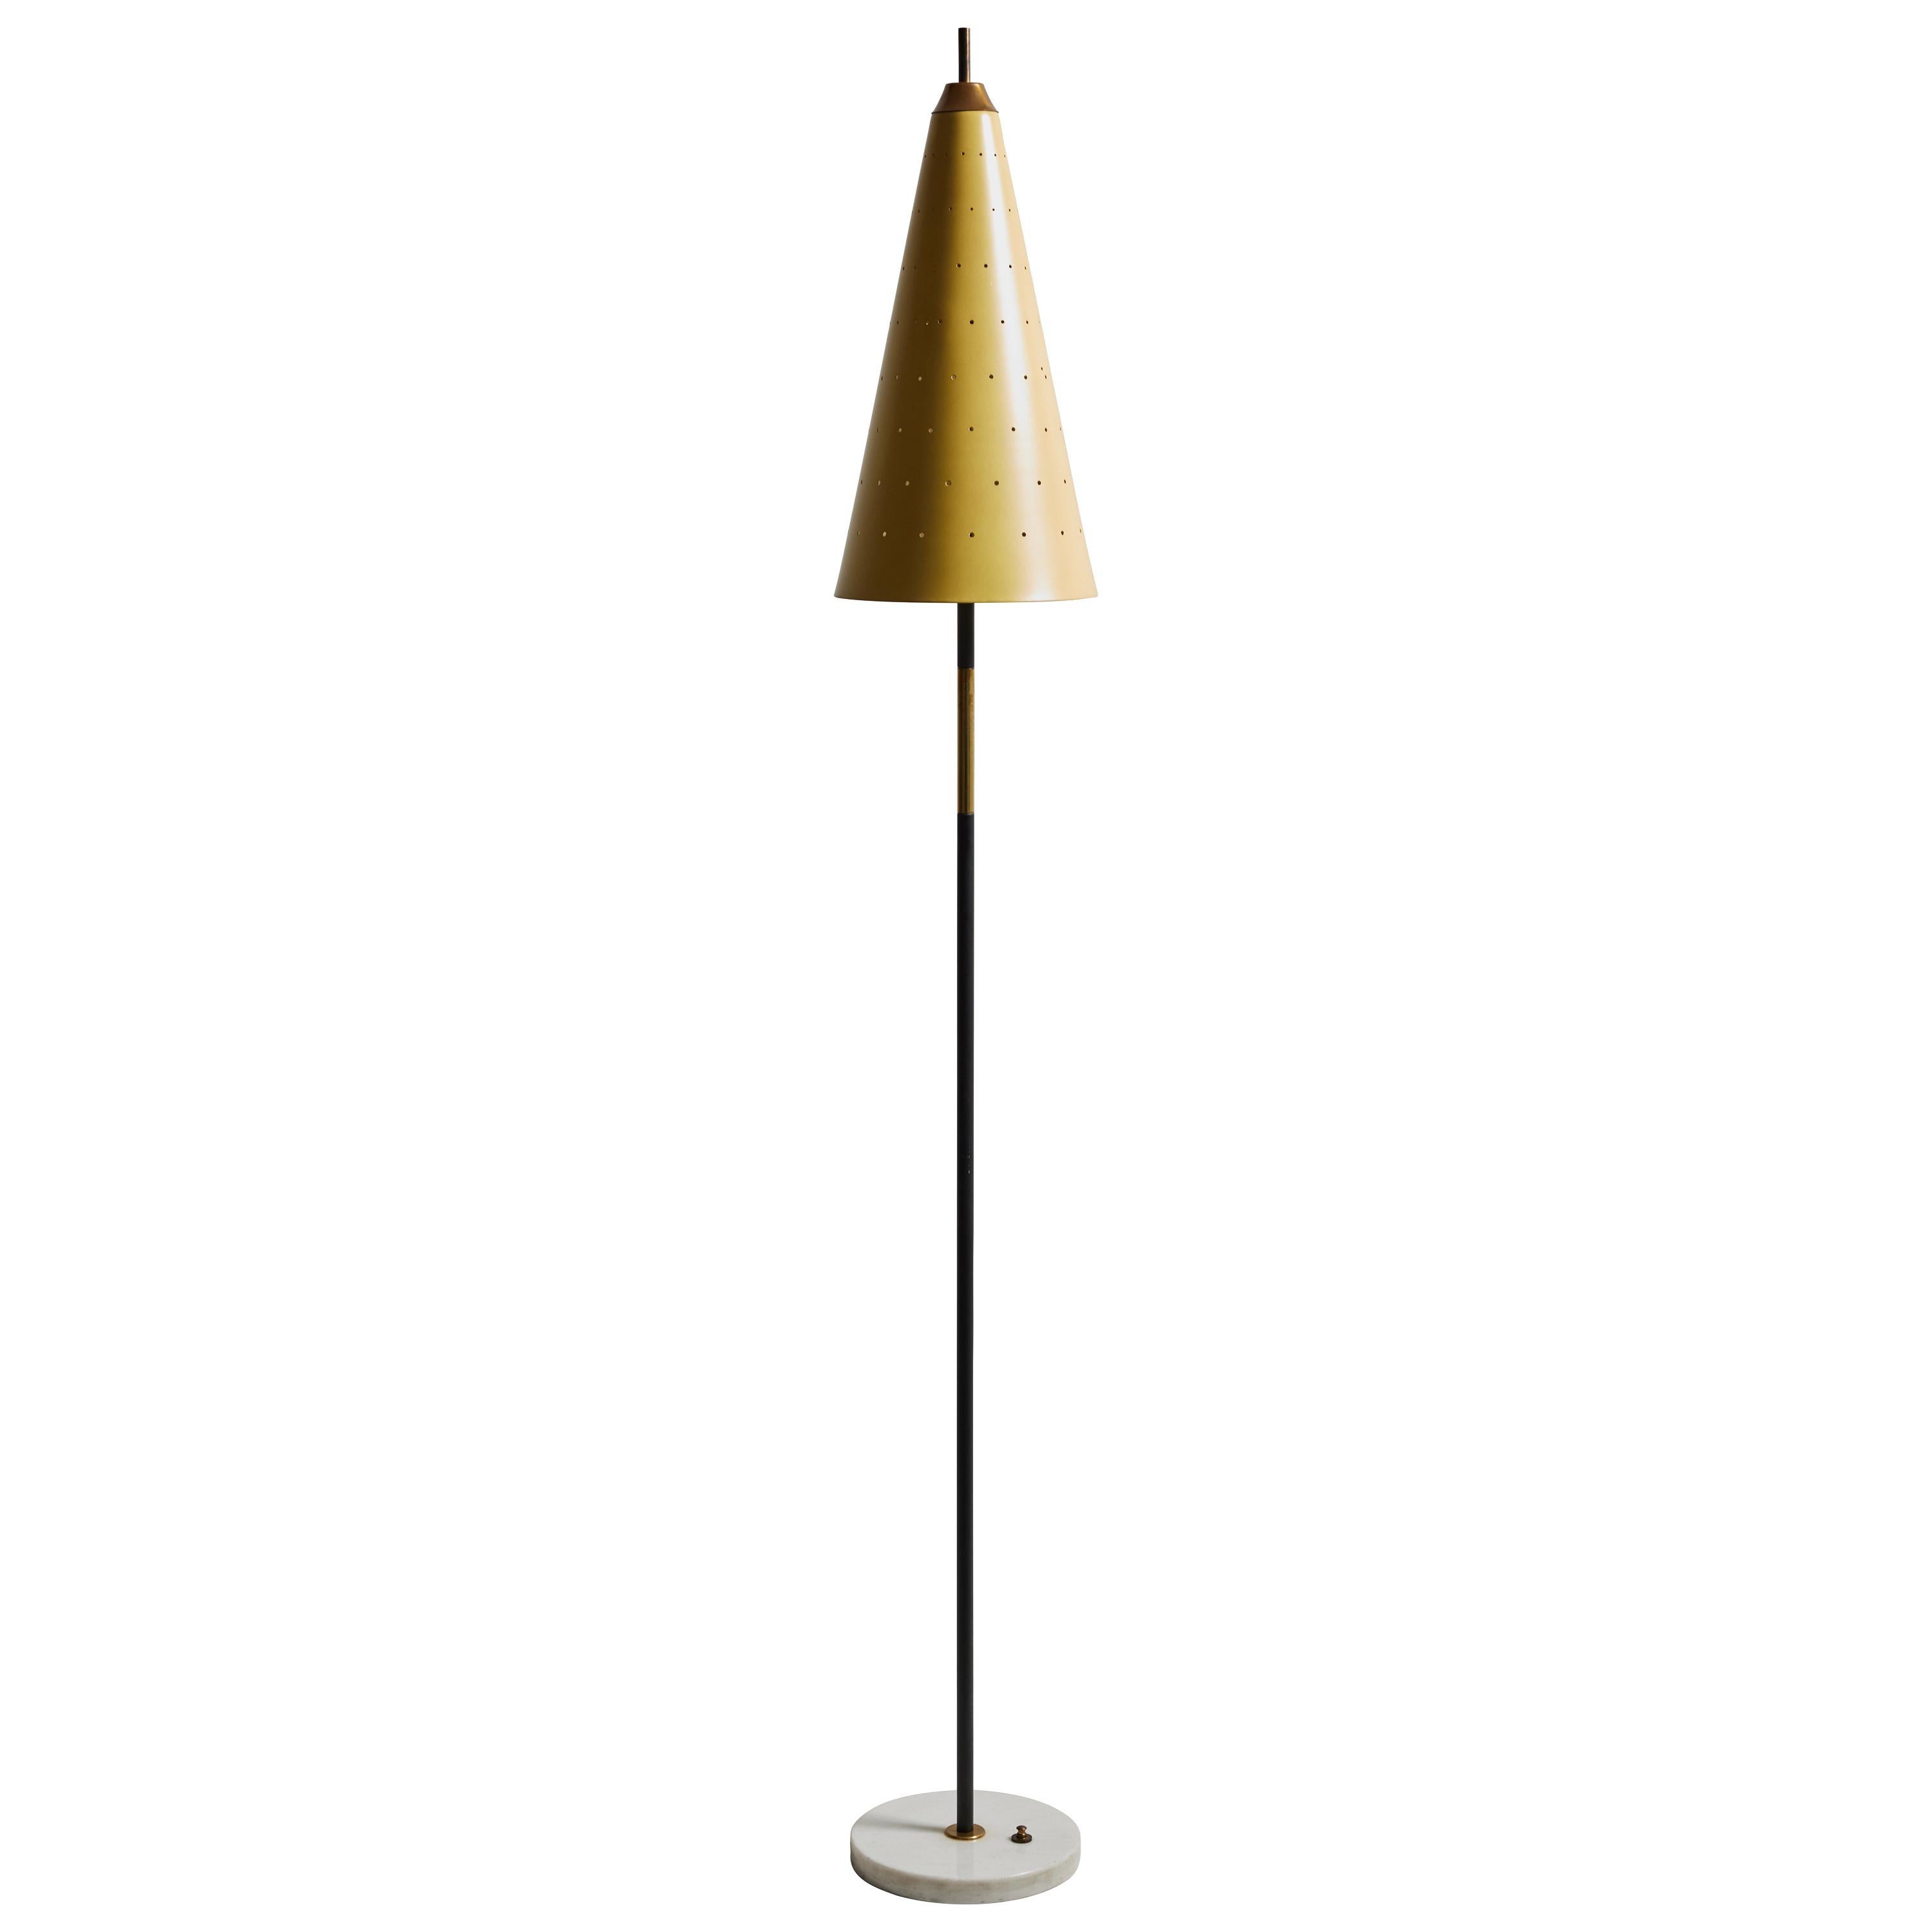 Floor lamp by Stilnovo. Manufactured in Italy, circa 1950s. Marble, brass, enameled metal. Original European cord. We recommend three E14 candelabra 40w maximum bulbs. Bulbs provided as a one time courtesy.